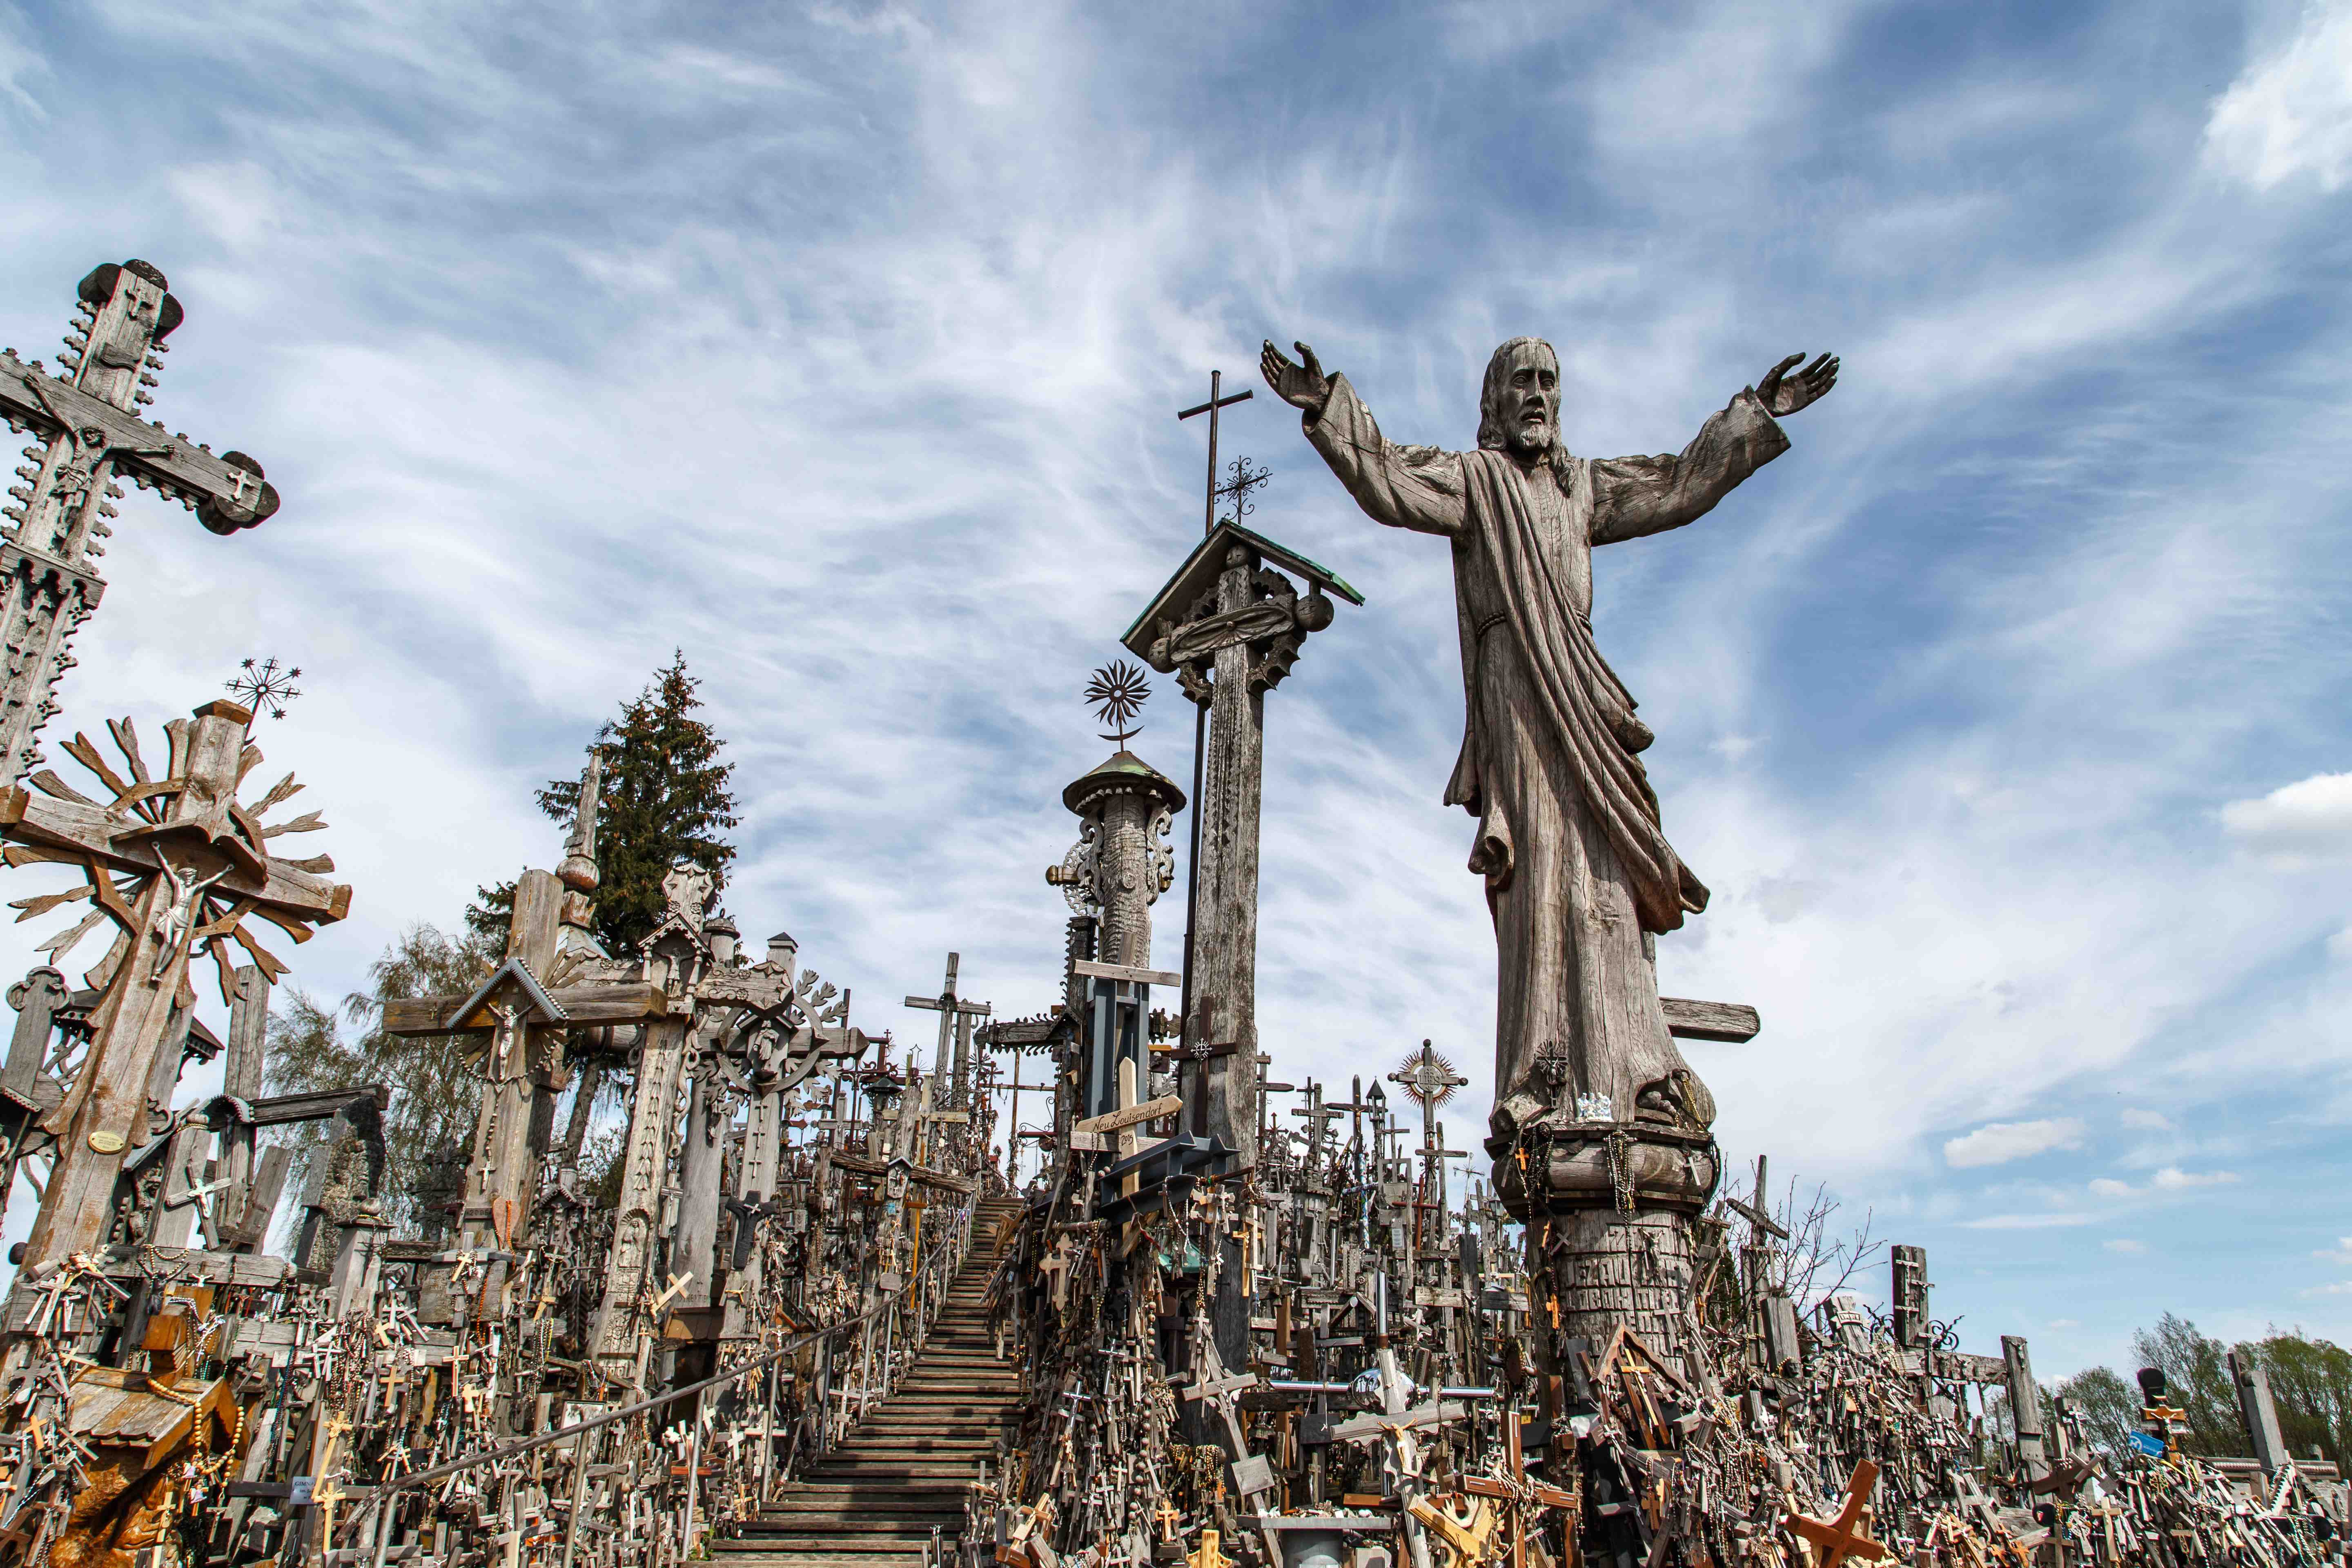 Hill of Crosses with Crucifix